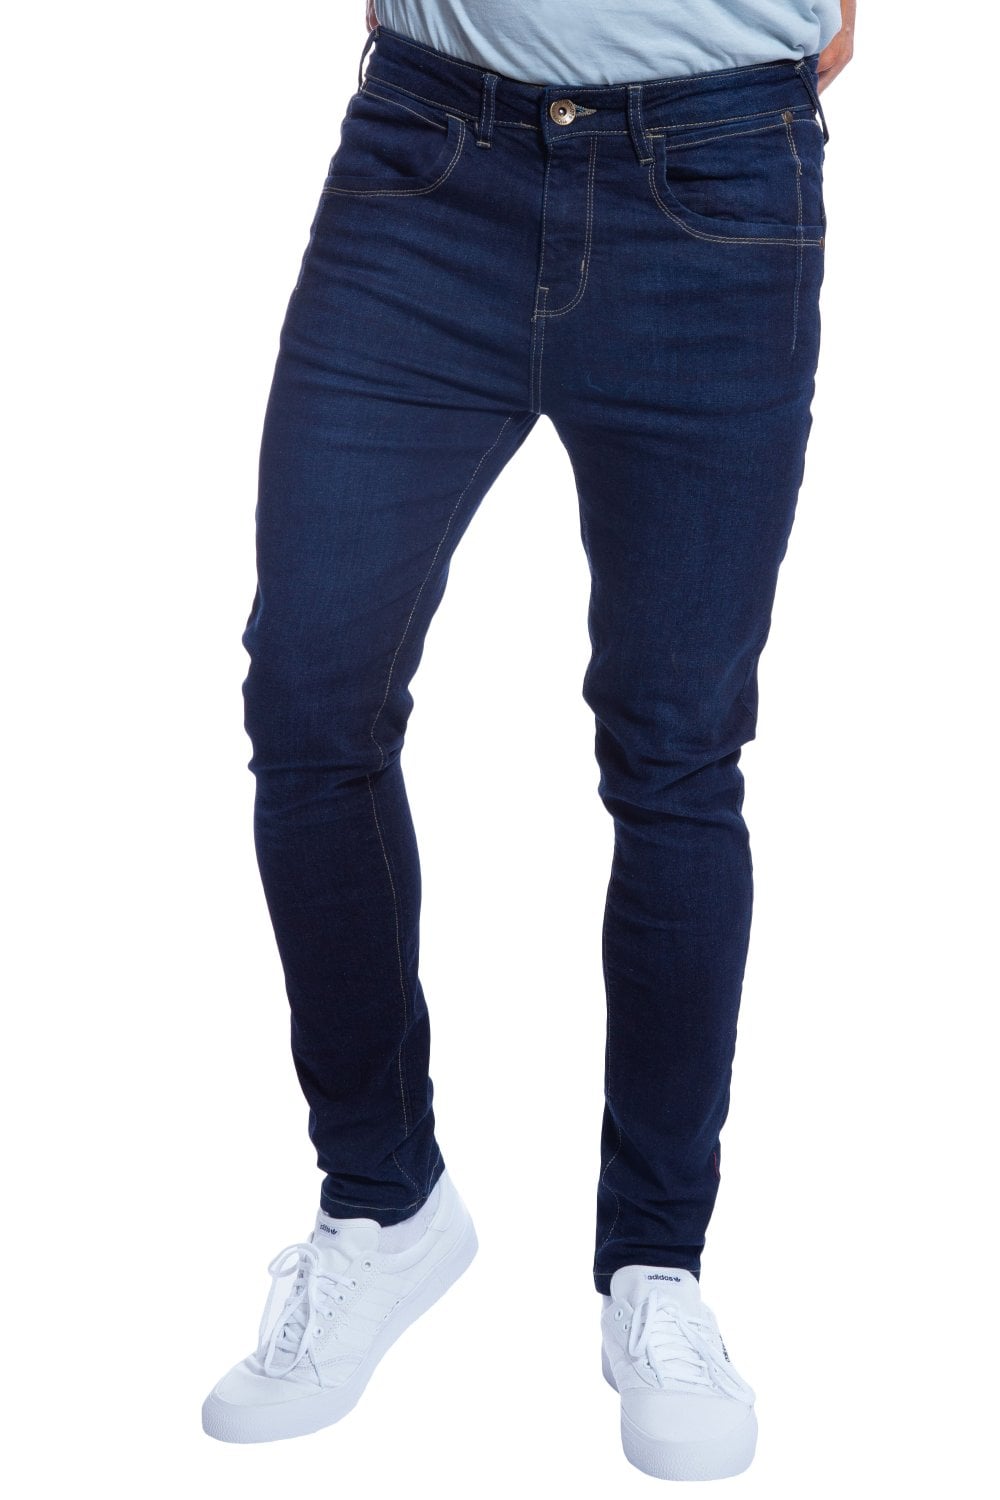 Skinny Fit Jeans - Shop 2 for £35